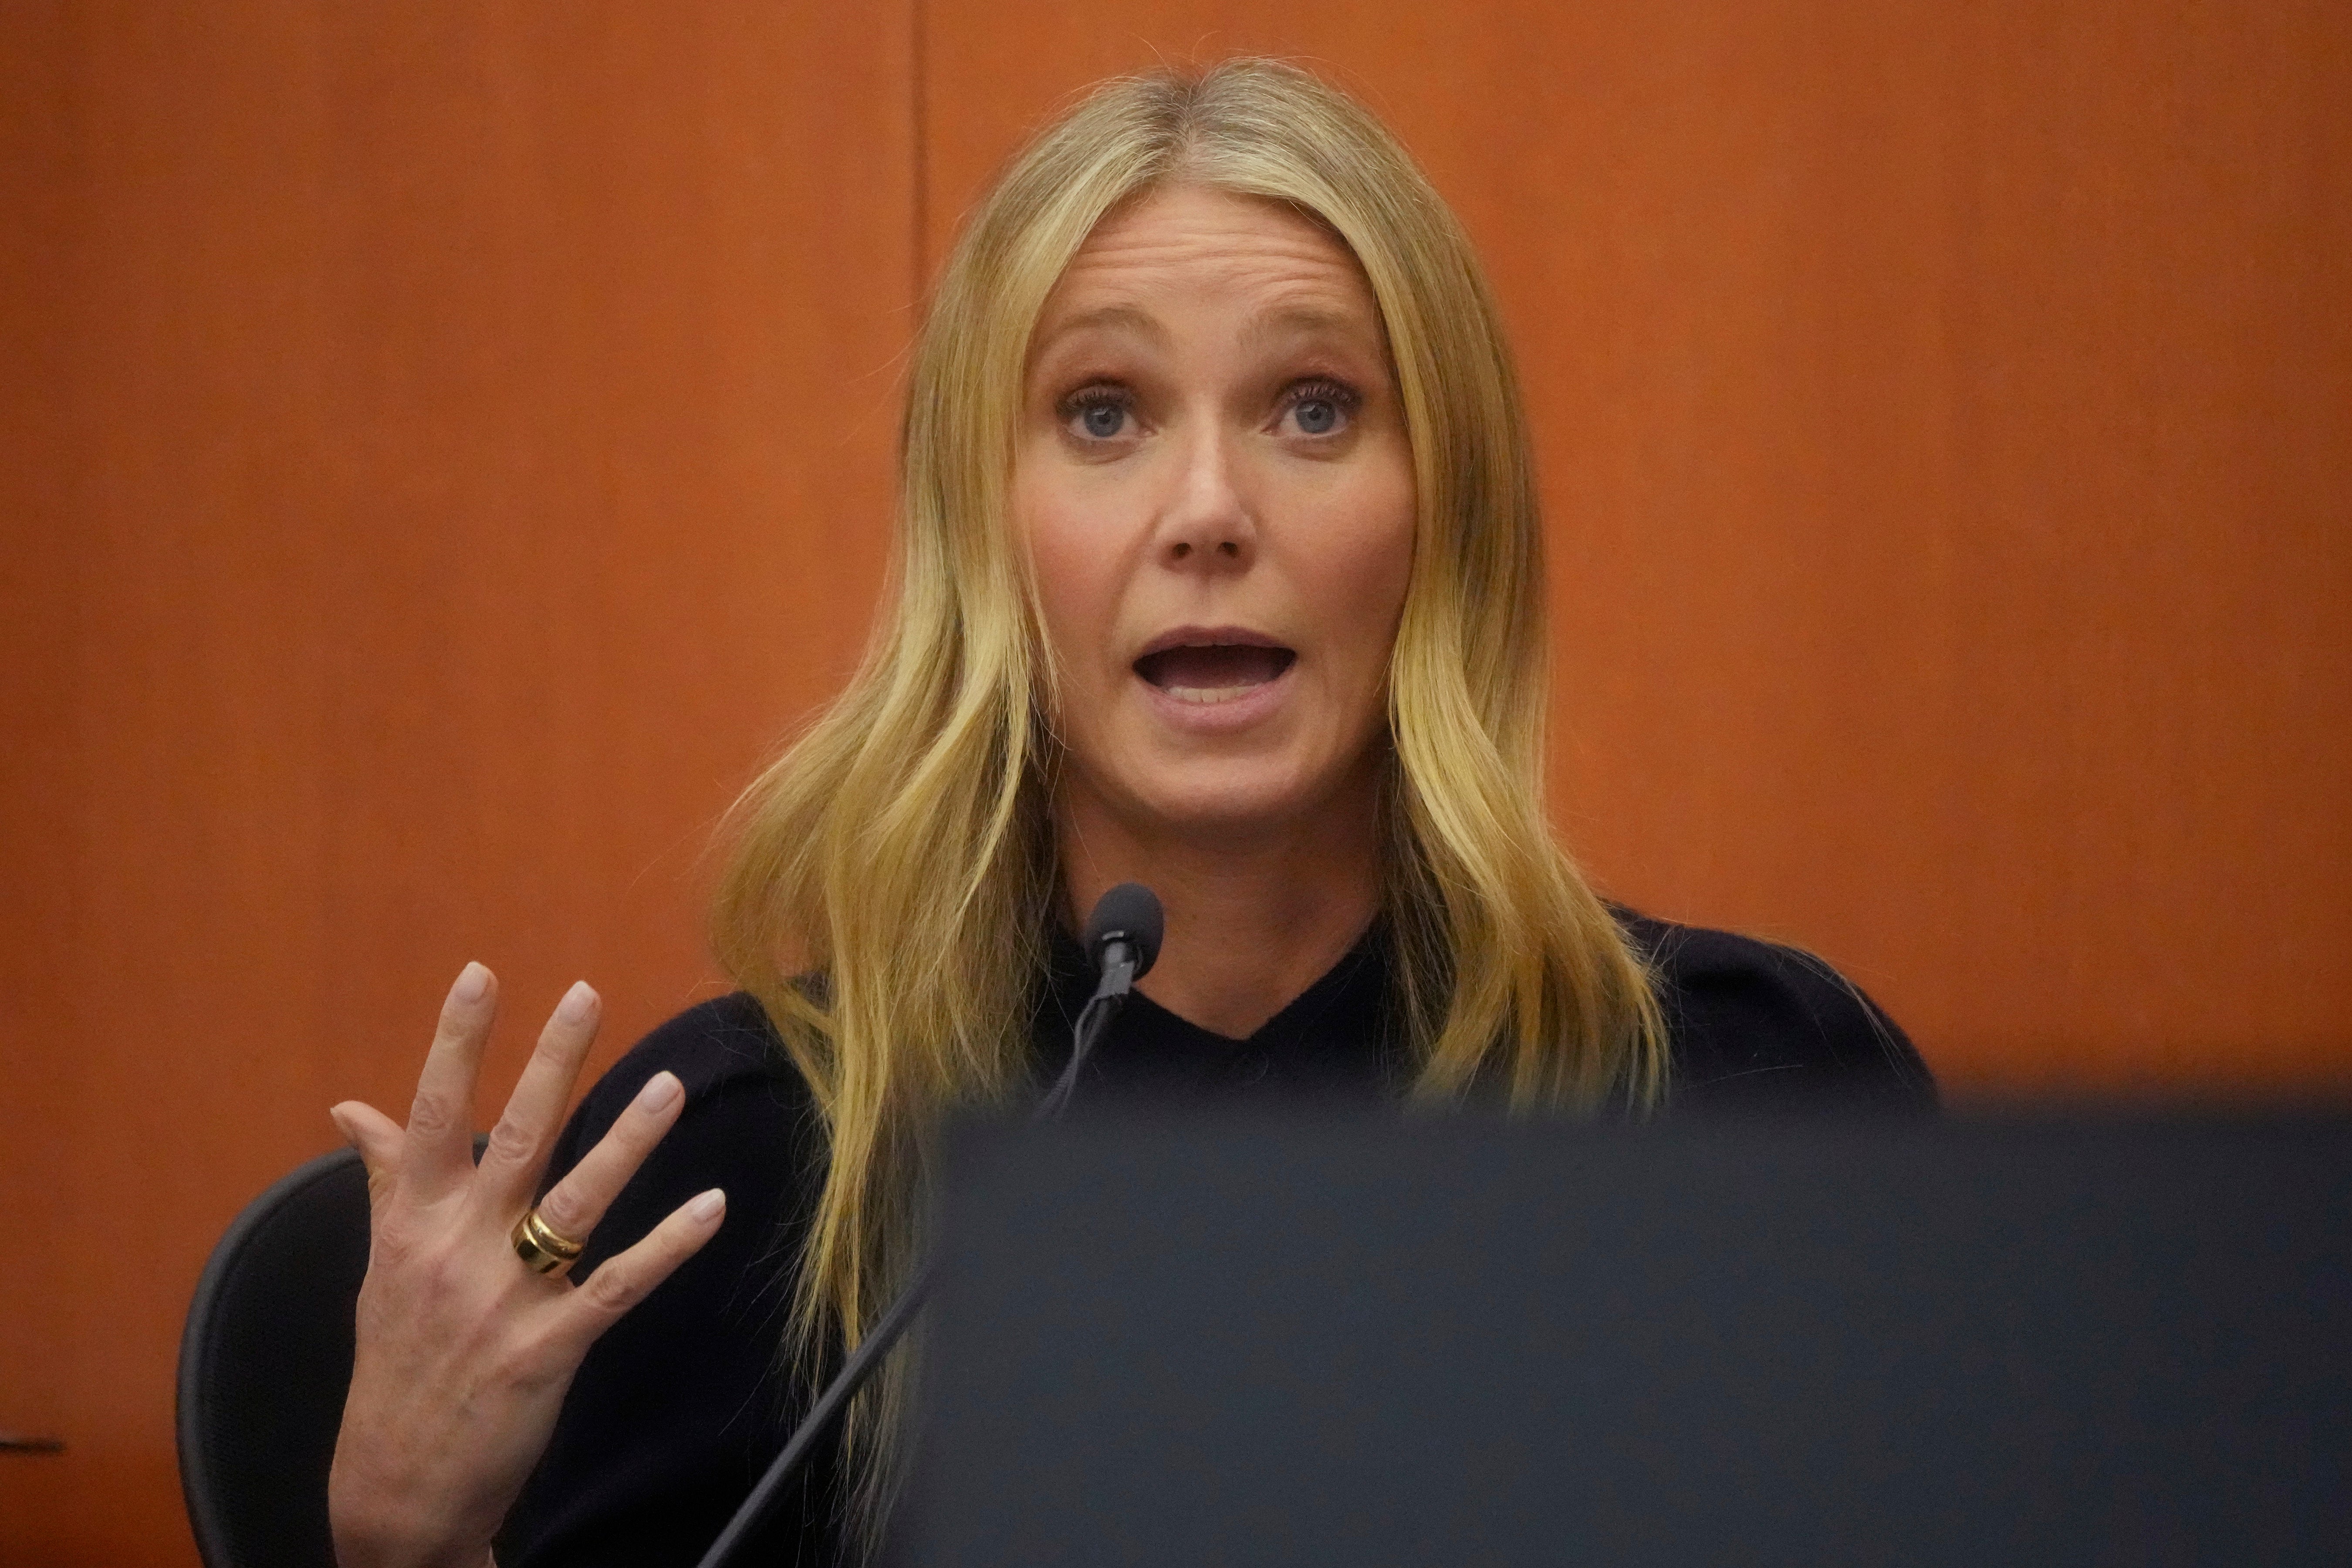 Gwyneth Paltrow gives testimony in the courtroom in Park City, Utah this week